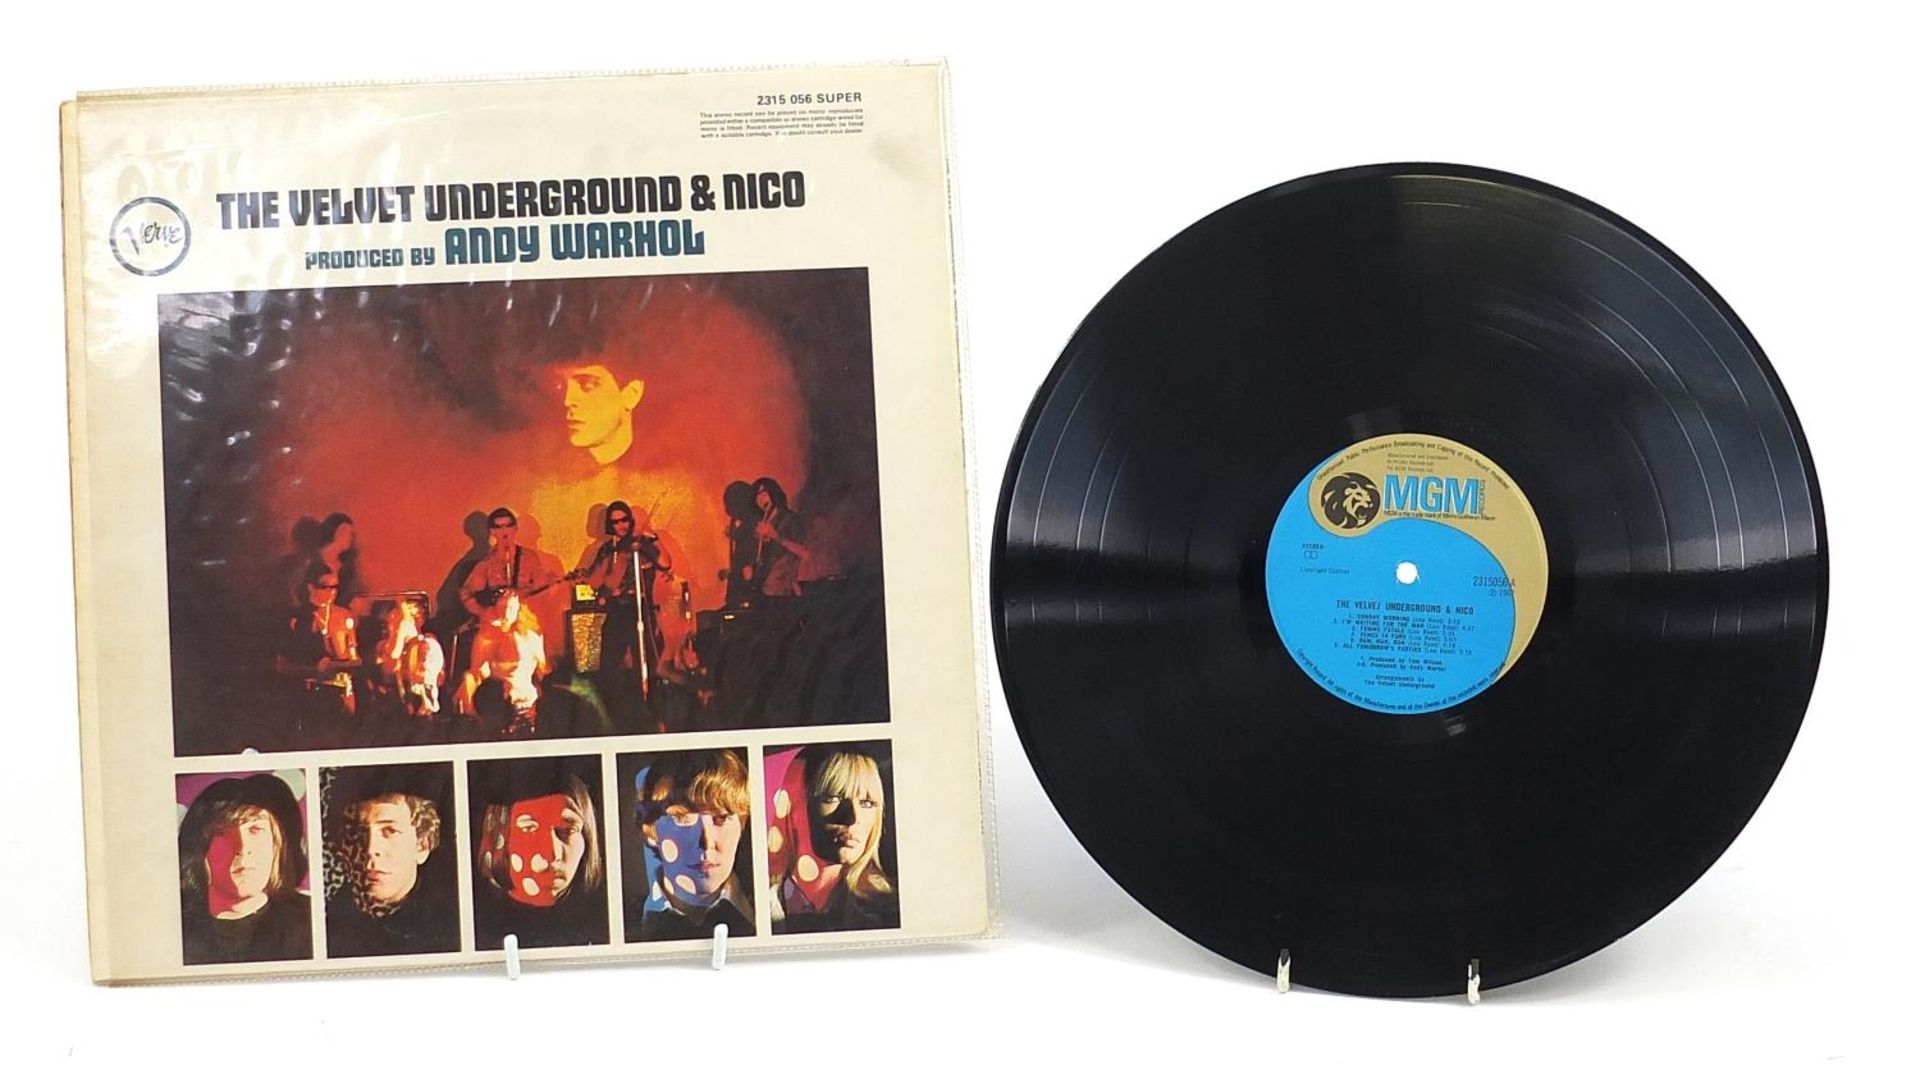 Velvet Underground & Nico vinyl LP with Andy Warhol decorated cover, MGM Records 2315056 - Image 2 of 2